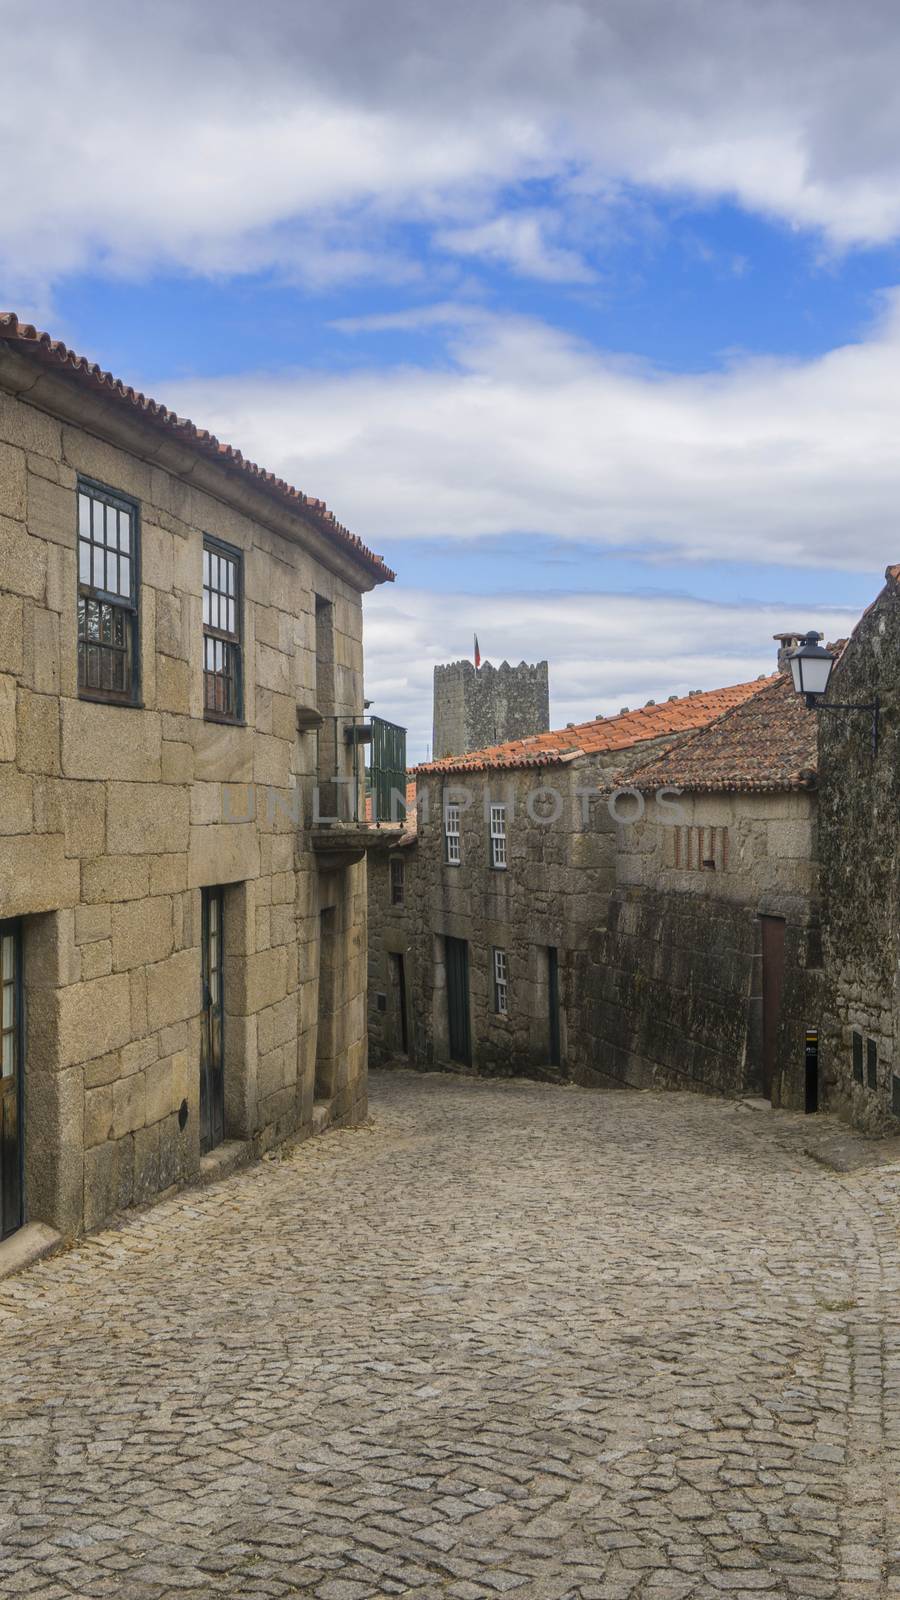 Images from historical portuguese village of Sortelha in Sabugal by ManuelS